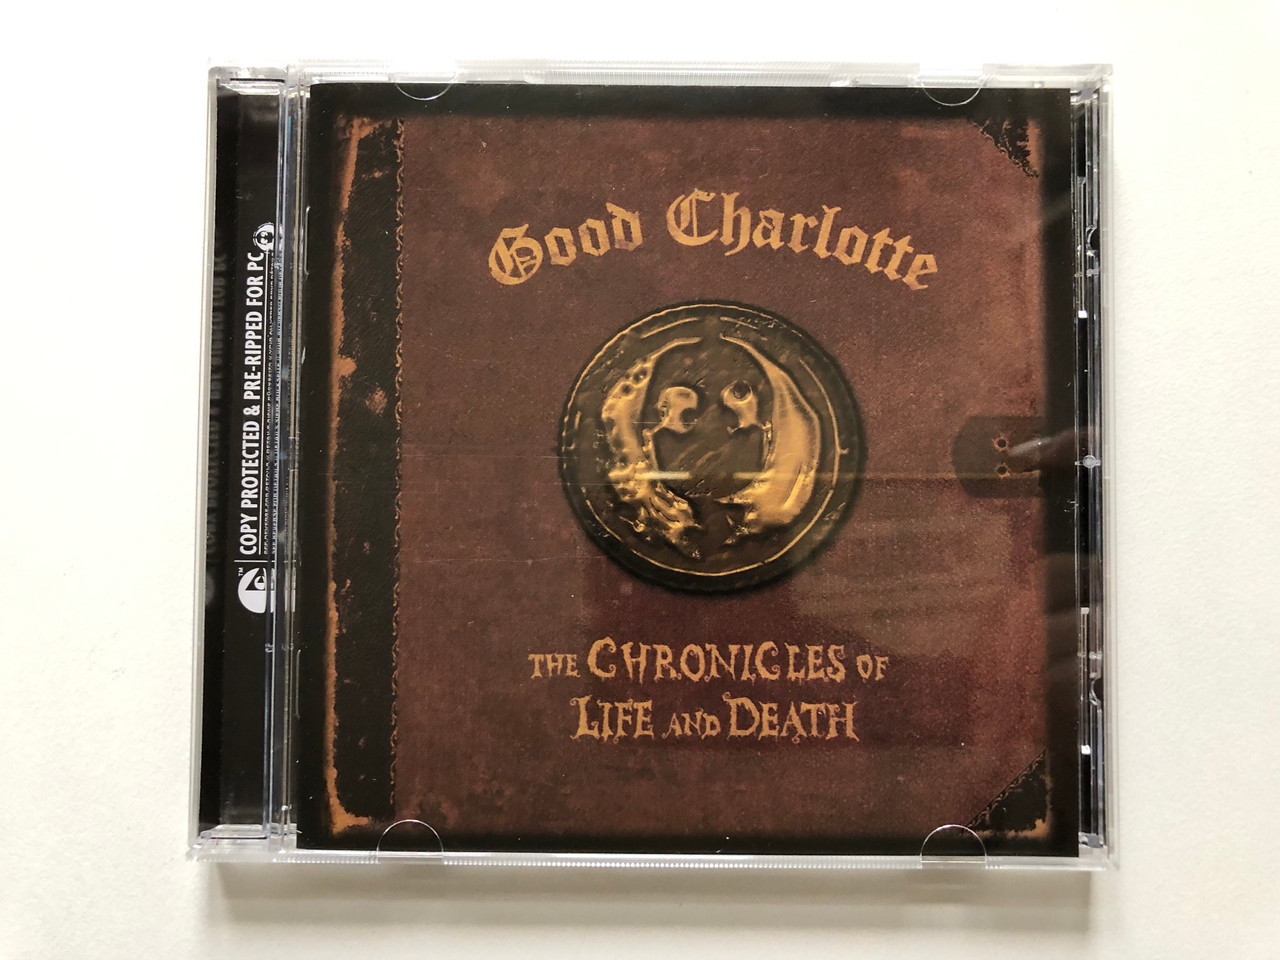 https://cdn10.bigcommerce.com/s-62bdpkt7pb/products/0/images/313415/Good_Charlotte_The_Chronicles_Of_Life_And_Death_Epic_Audio_CD_2004_517685_9_1__96080.1700758202.1280.1280.JPG?c=2